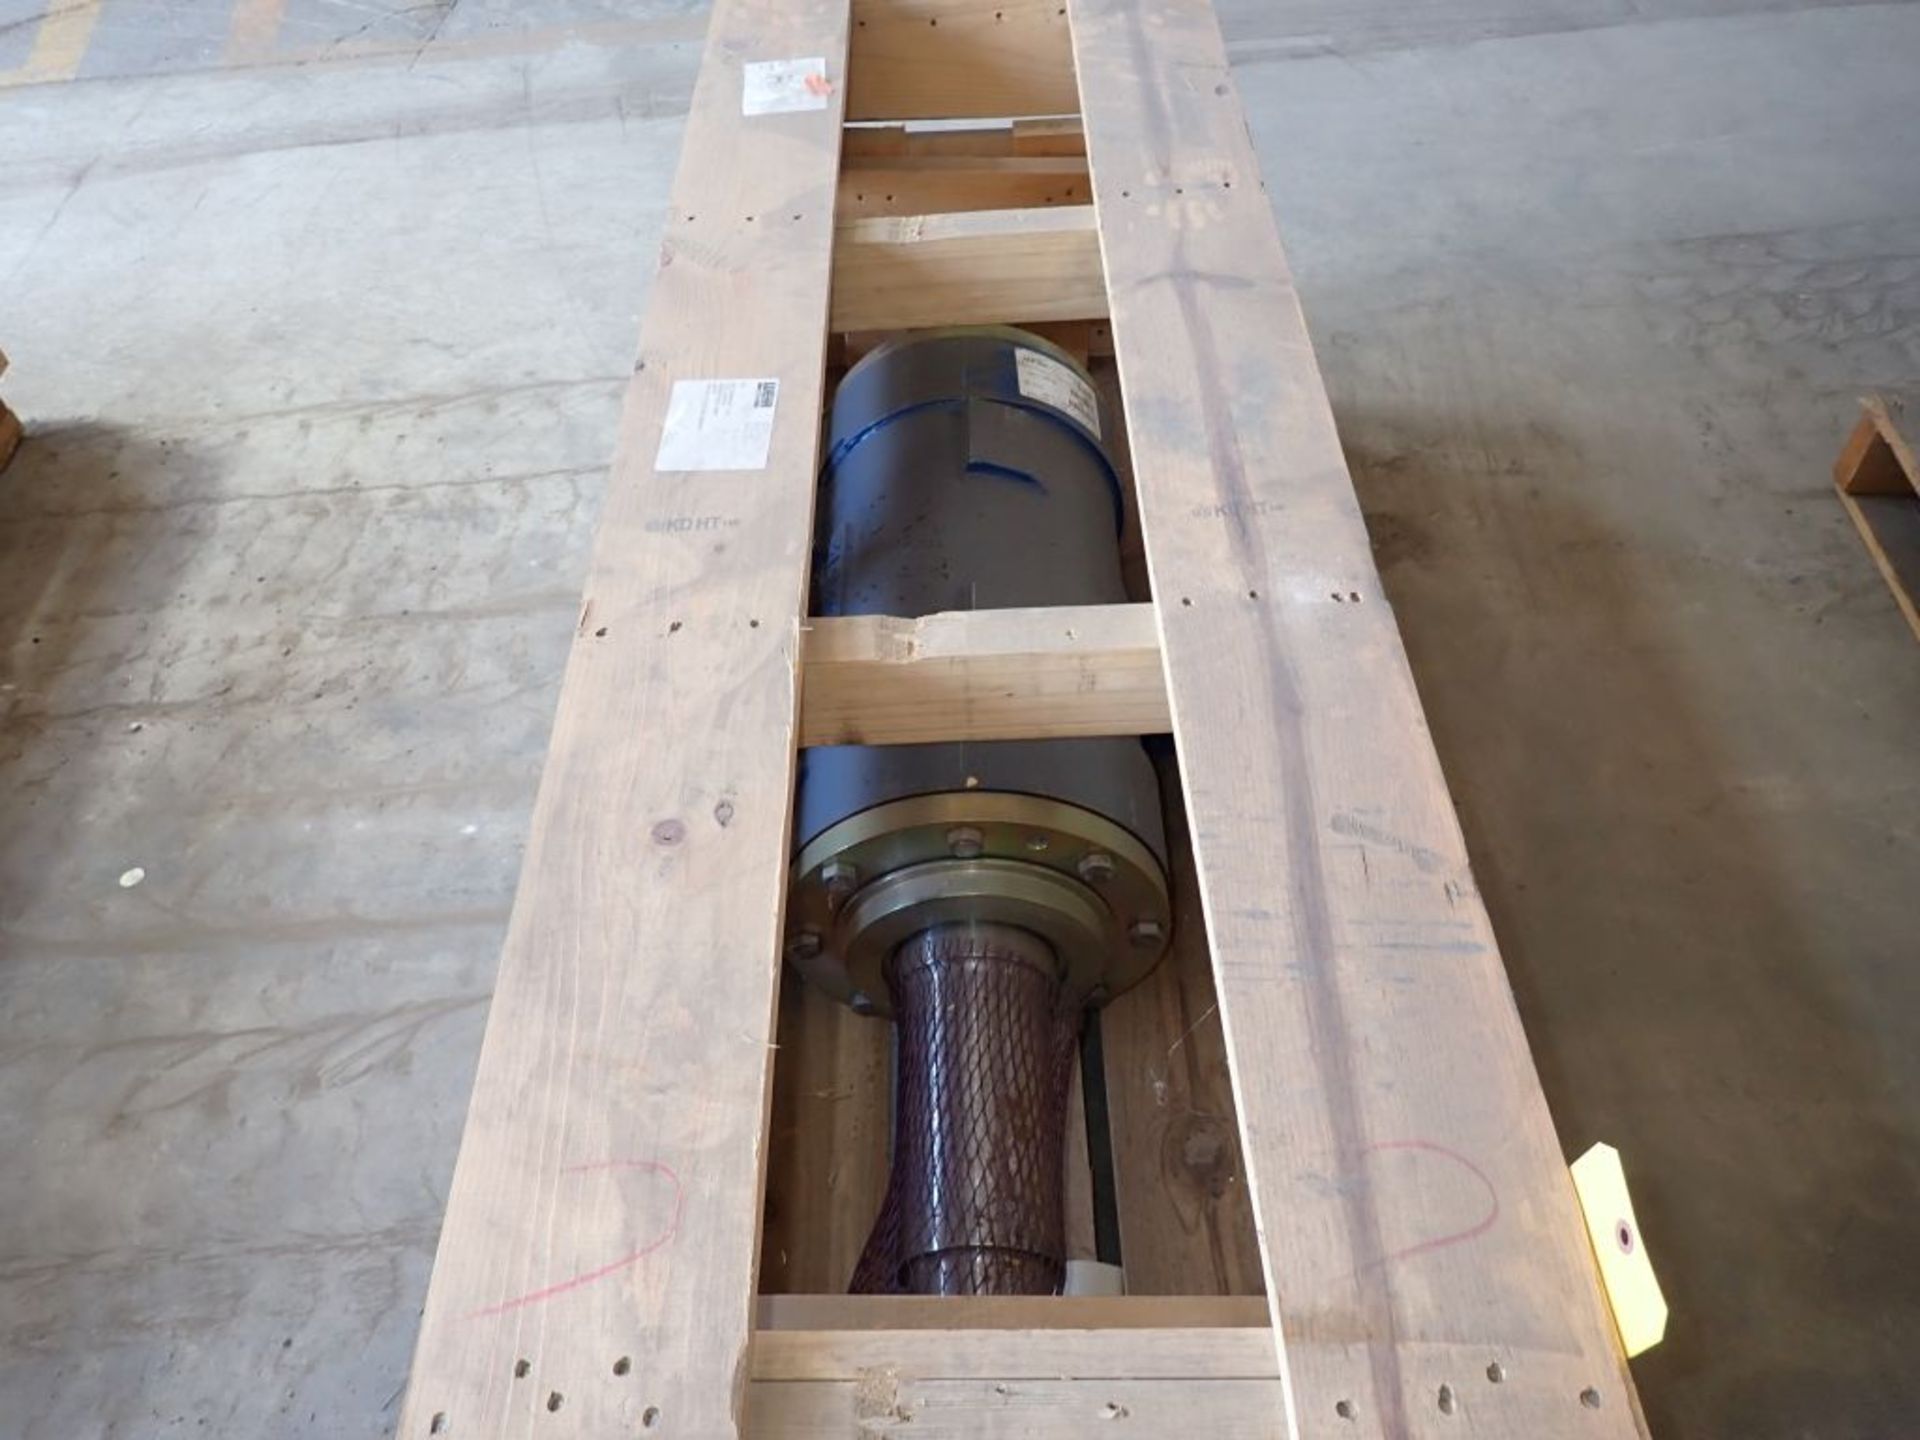 Weir Slurry Bearing Assembly | Part No. S005-2M; 2-Shaft 1-10 MET